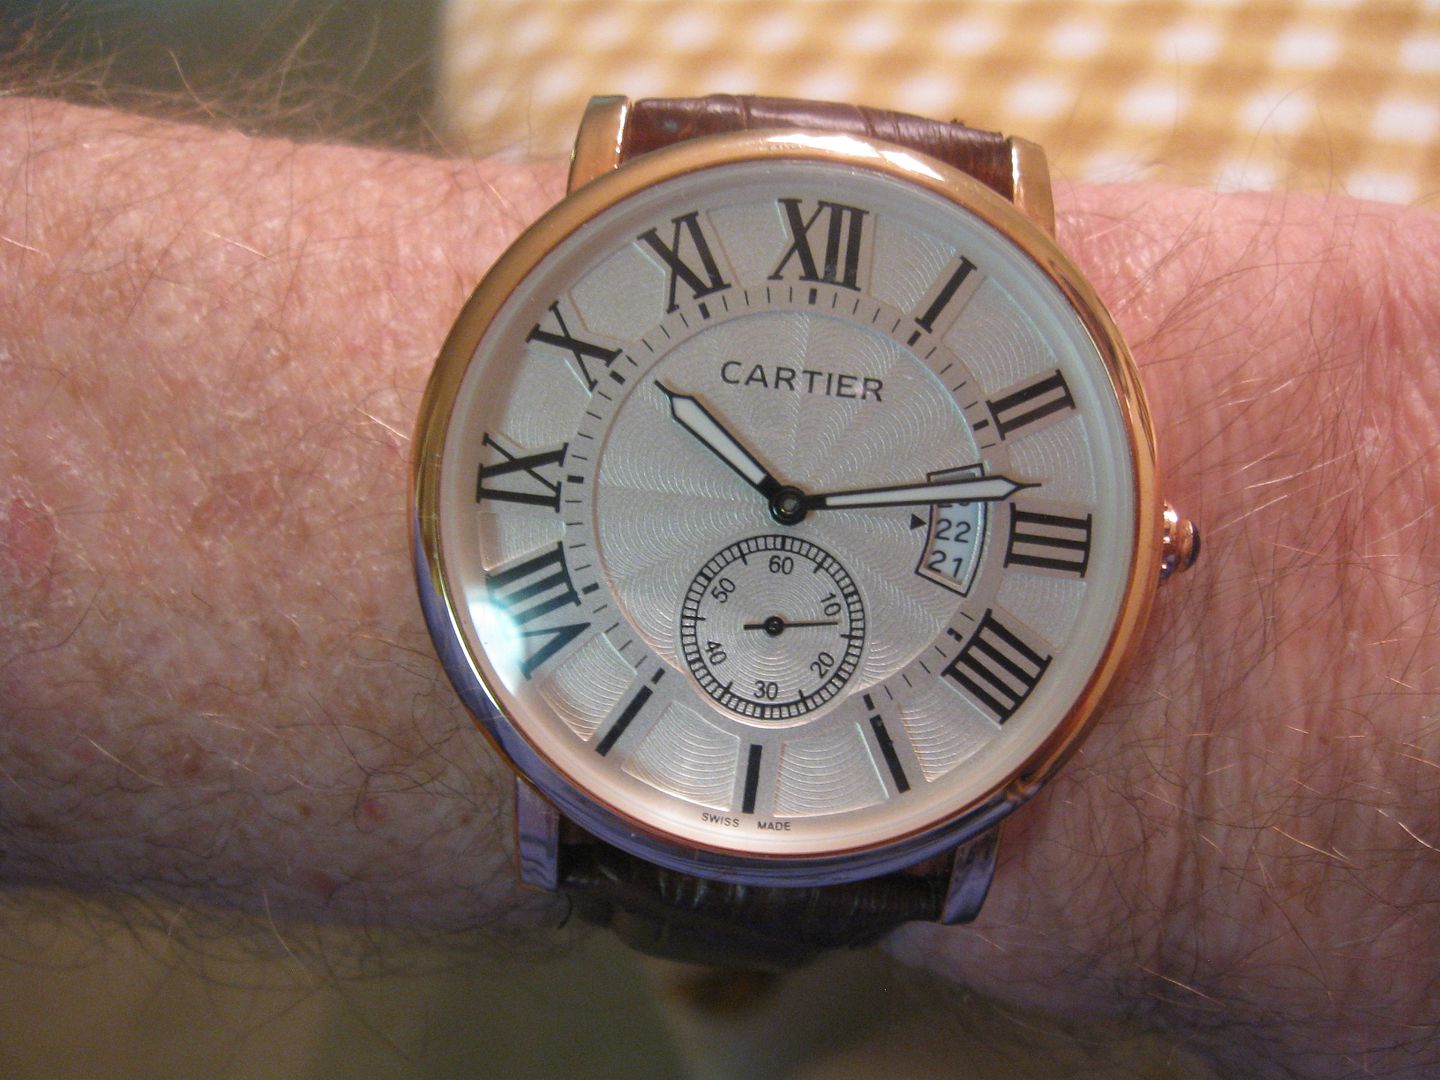 CARTIER.Small.Sec.Dial.%20on%20allegator